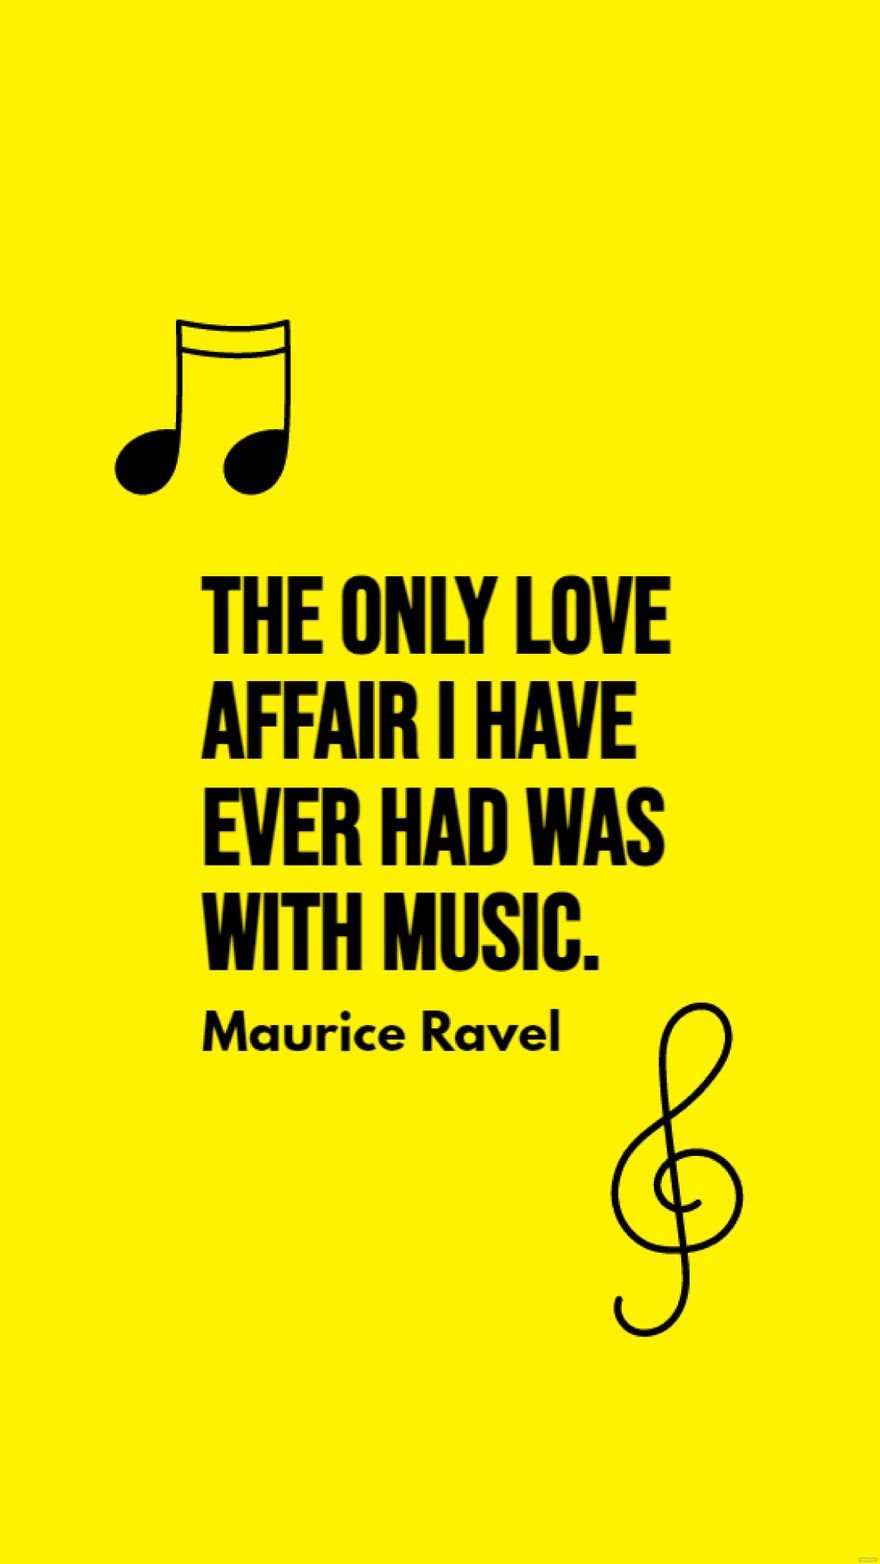 Maurice Ravel - The only love affair I have ever had was with music.